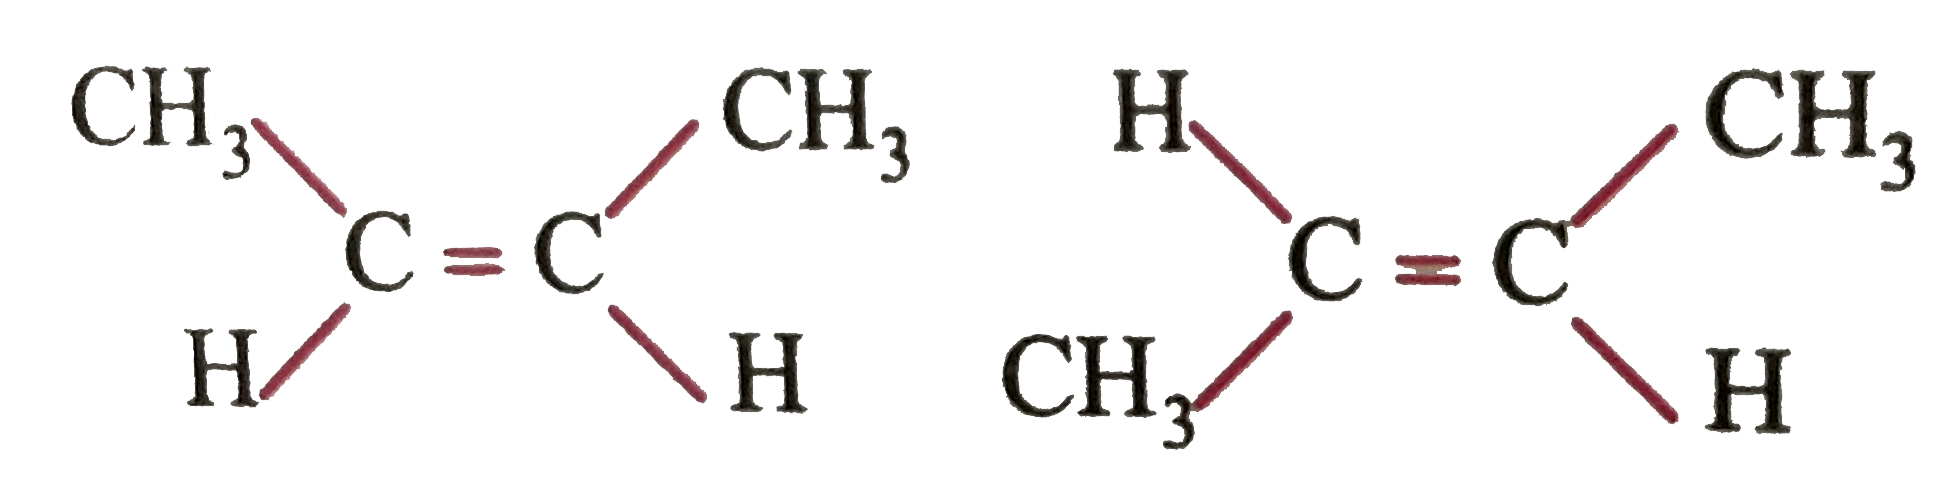 You are given two compound      First, you name both of them the same yet, are they really same structure, or they some how different ?Carefully inspection should convince you that they are indeed different. Now, how their physical and chemical properties differ? Generally   (i) cis-isomer has more diplomoment than trans-isomer   (ii) cis-is less stable than trans   (iii) boiling points of cis isomers are than those of trans isomers (remember boiling points are directly related to polarity which is determined by dipolemoment) chemical reactivities of cis and trans also differ from each other.   Which of the following compounds exhibit geometrical isommerism?